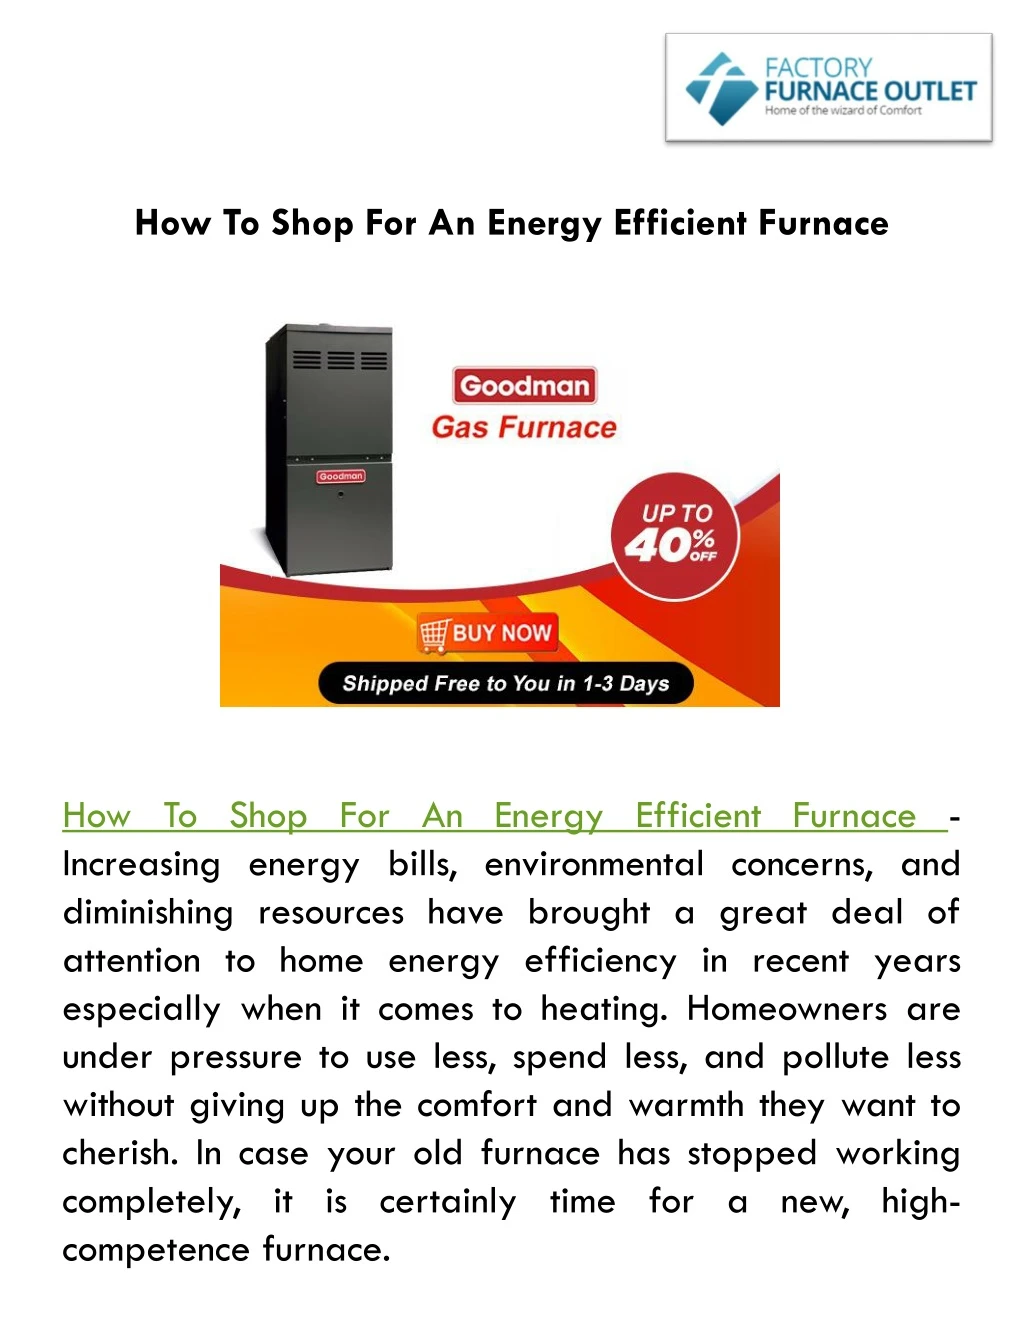 how to shop for an energy efficient furnace